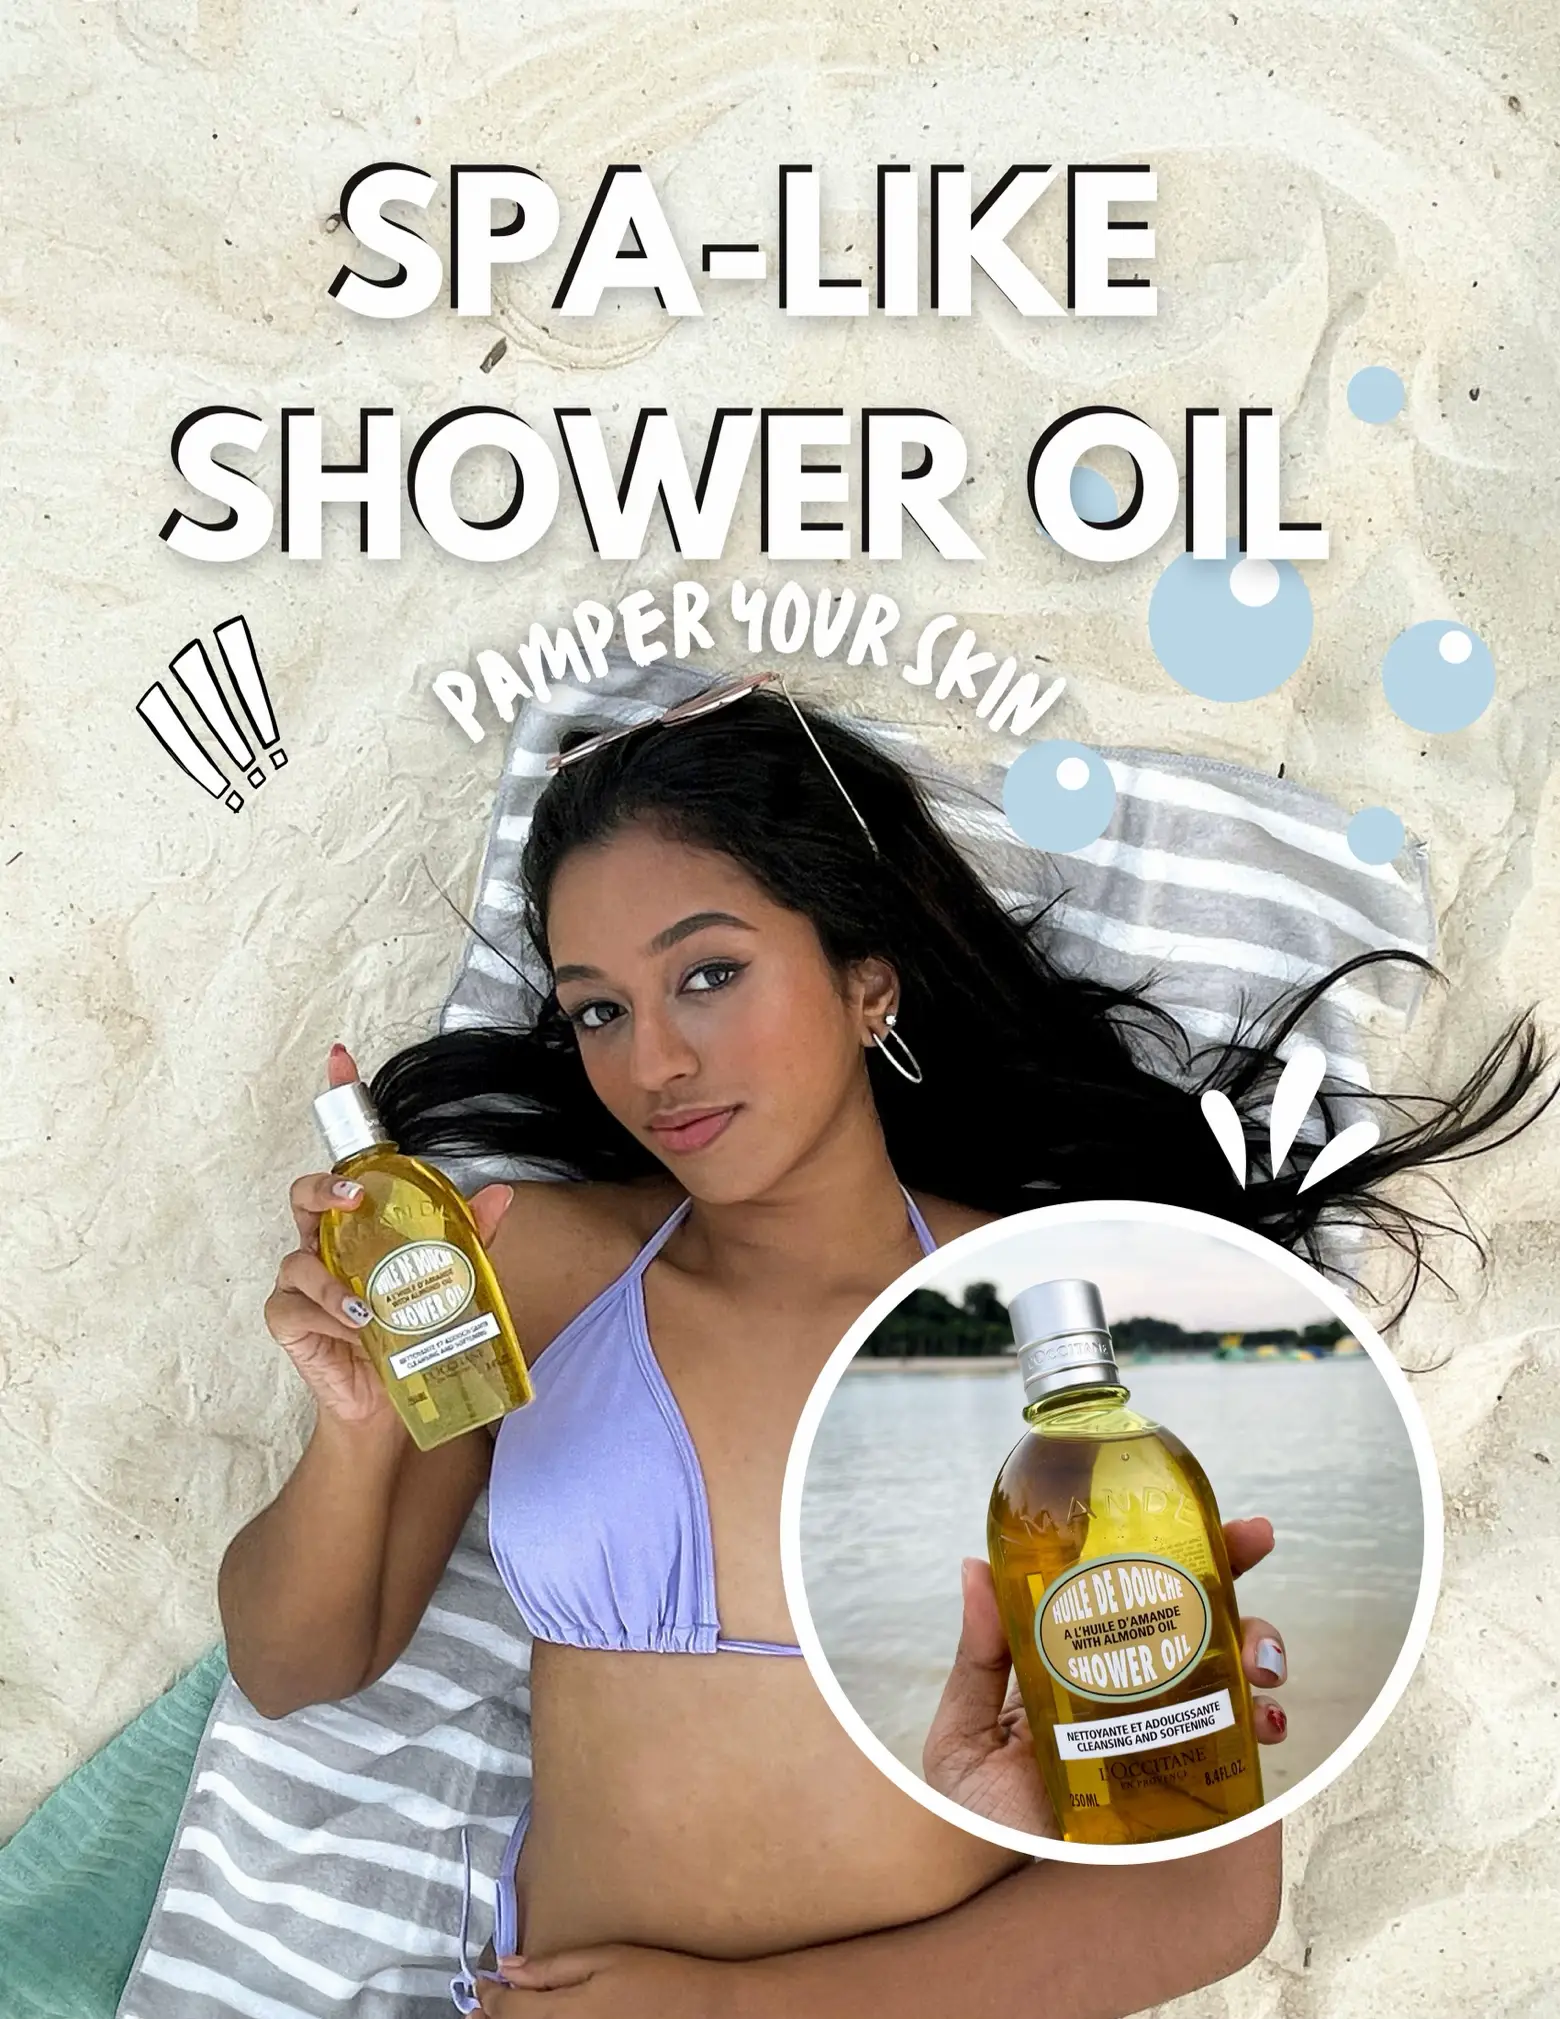 CURRENT FAVE BODYCARE PRODUCT: Almond Shower Oil 💛